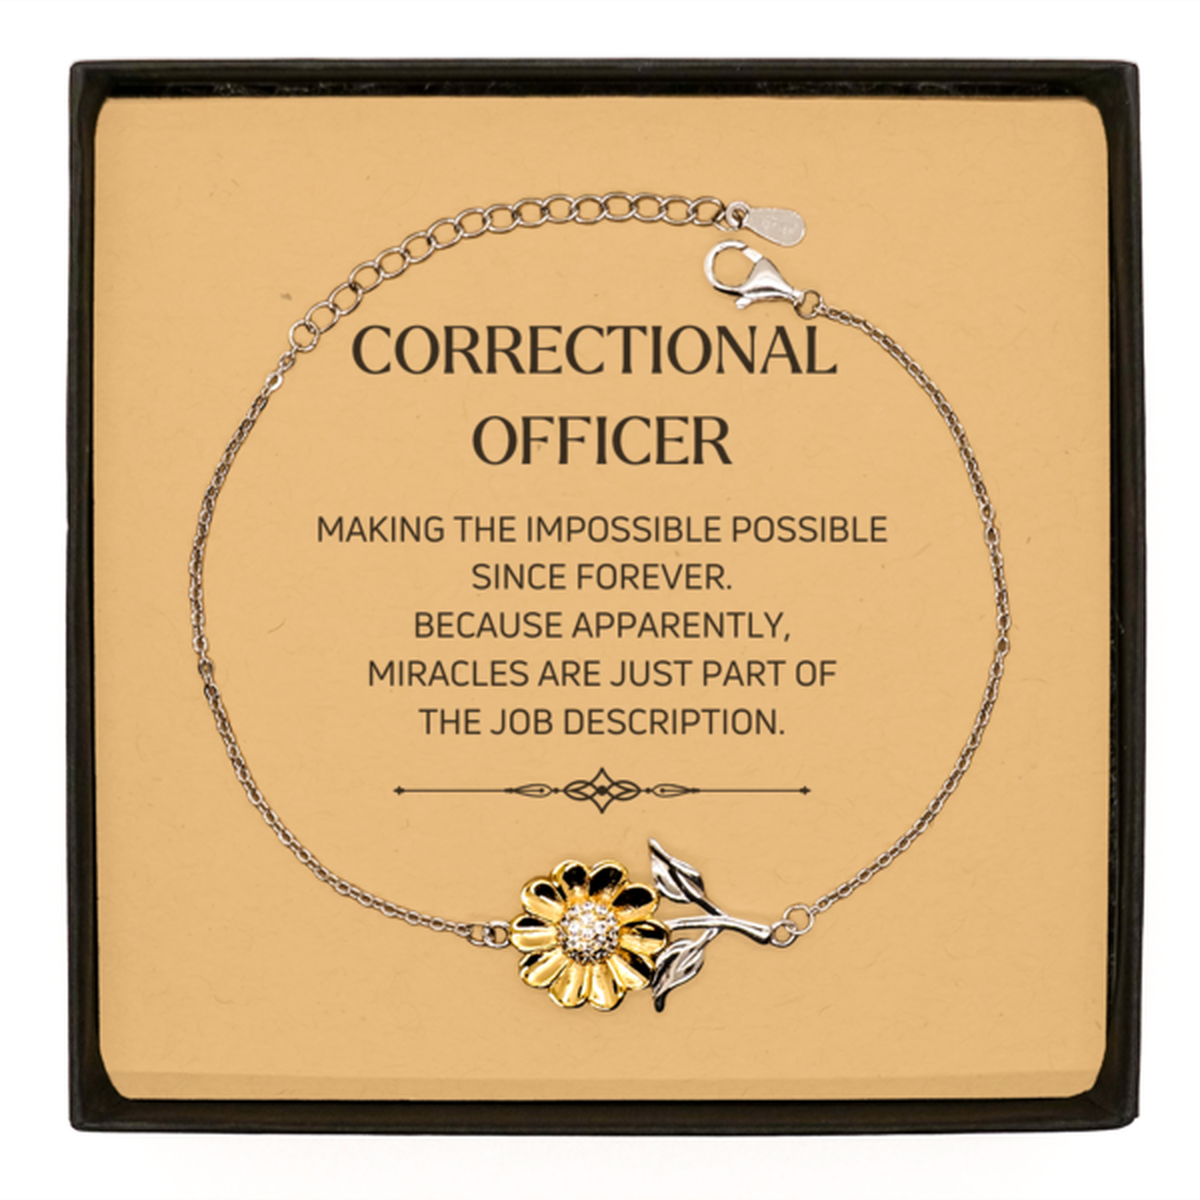 Funny Correctional Officer Gifts, Miracles are just part of the job description, Inspirational Birthday Sunflower Bracelet For Correctional Officer, Men, Women, Coworkers, Friends, Boss